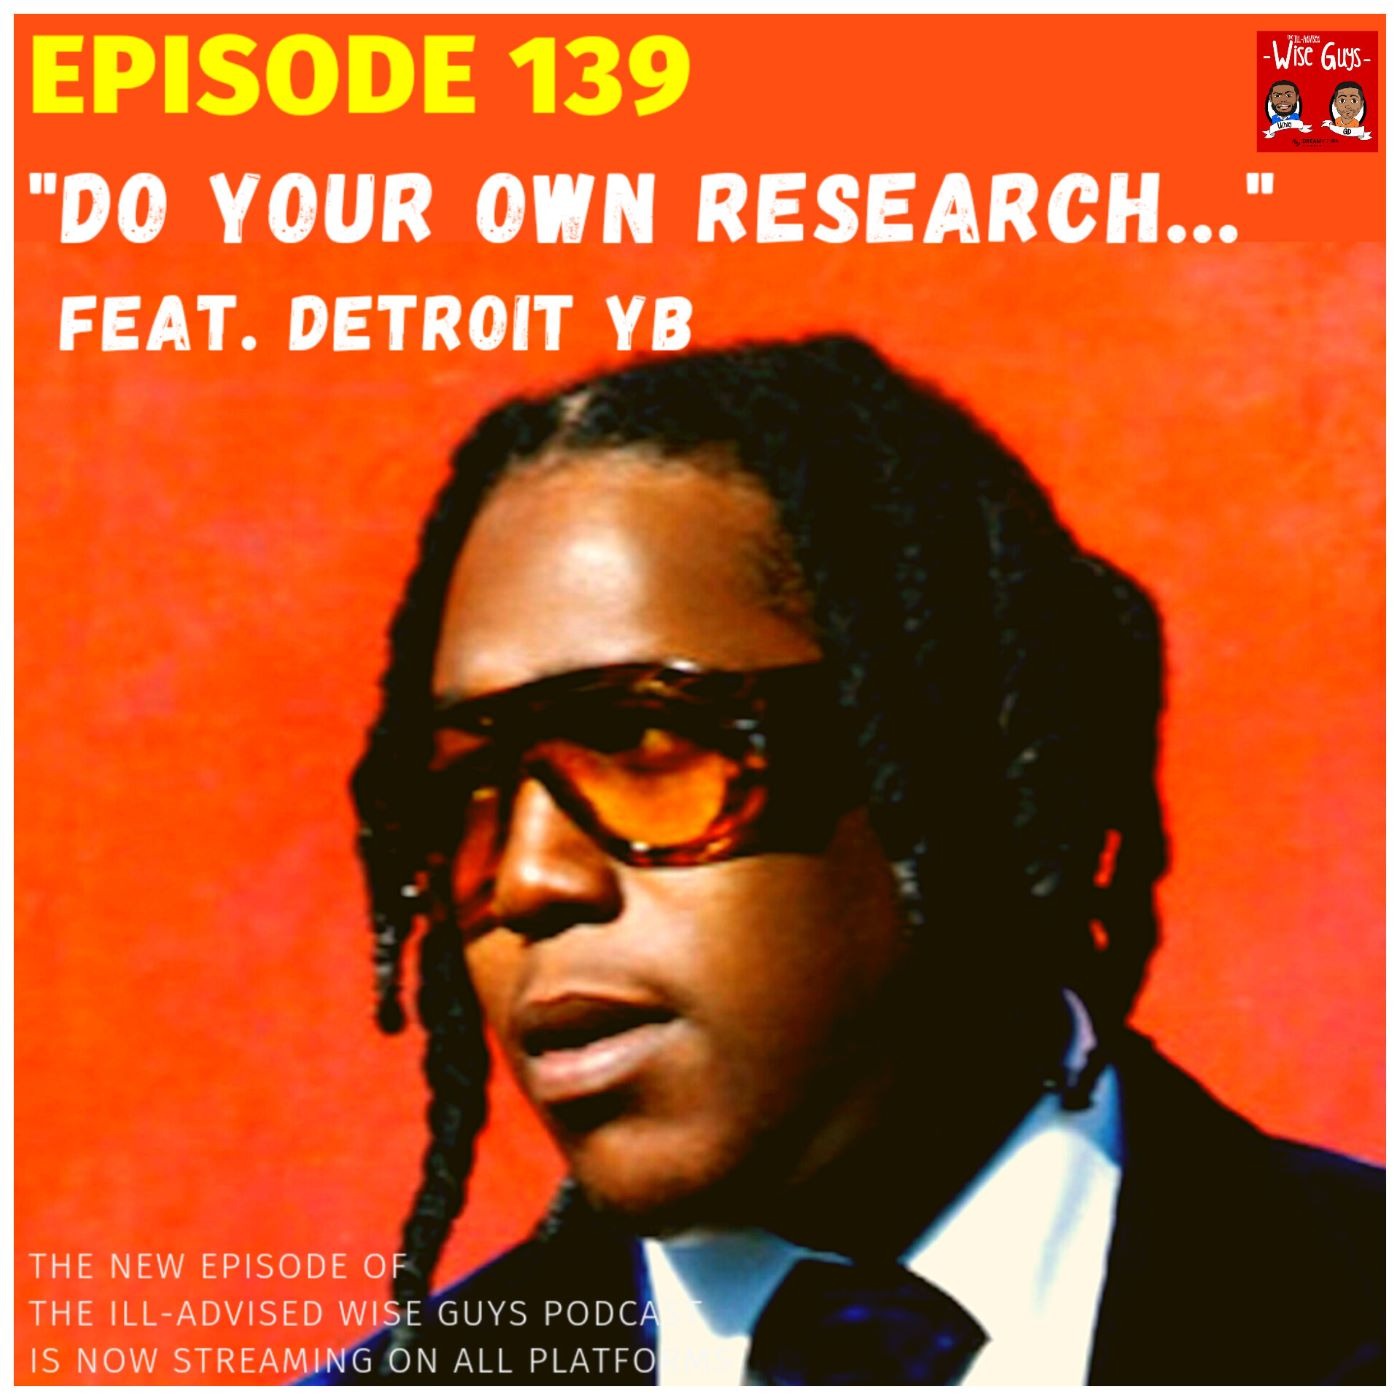 Episode 139 - "Do Your Own Research..." (Feat. Detroit YB)